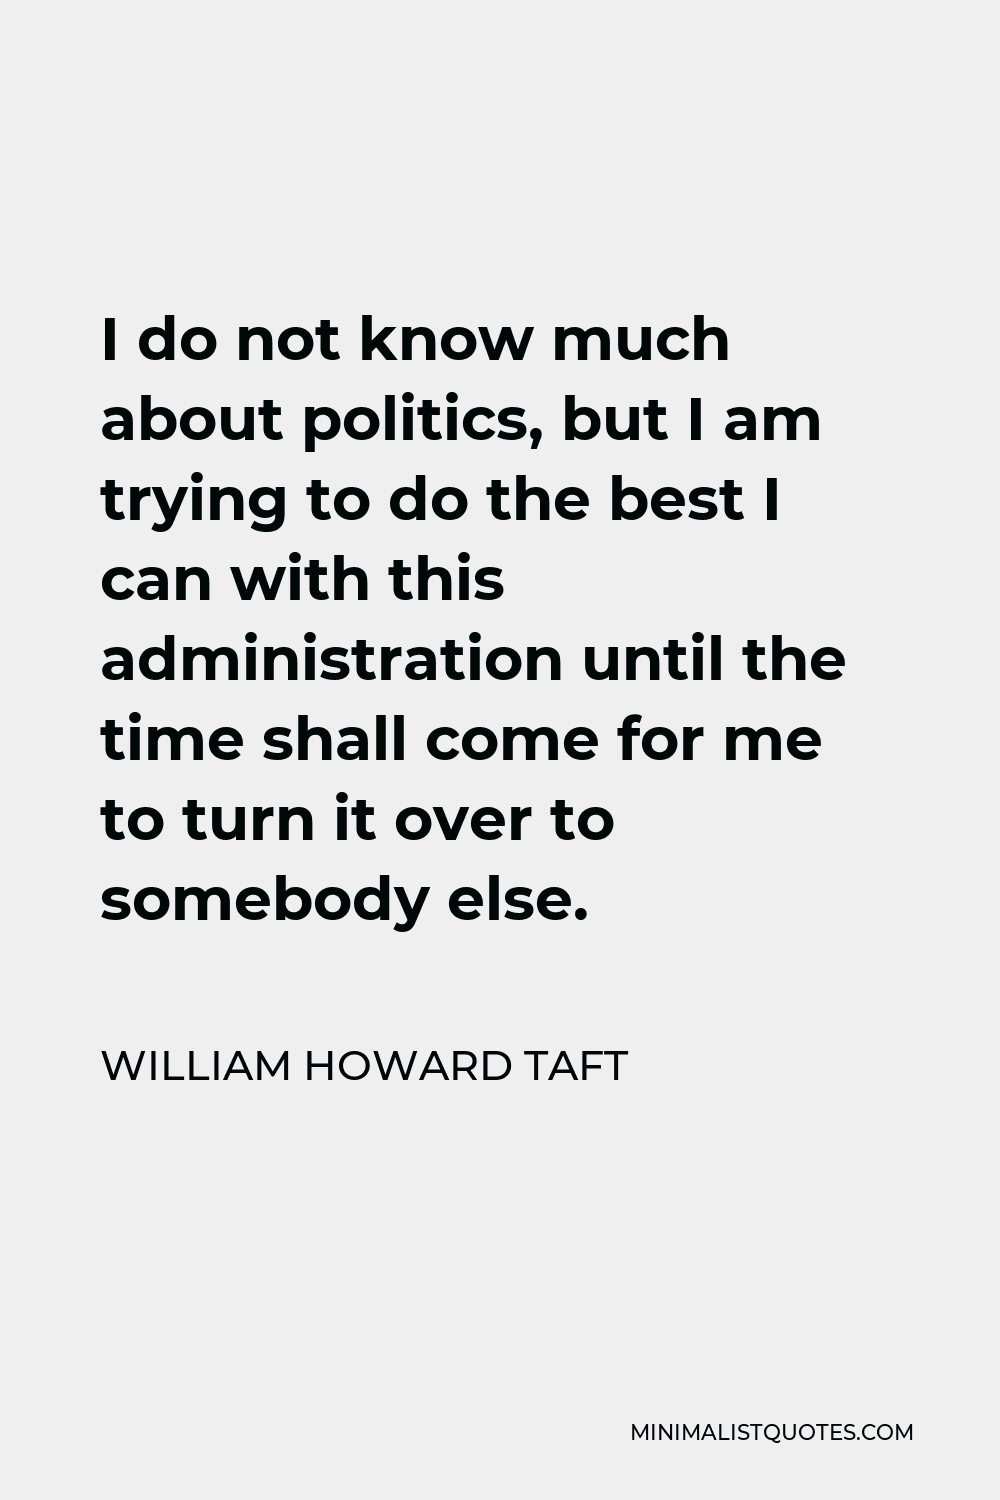 William Howard Taft Quote - I do not know much about politics, but I am trying to do the best I can with this administration until the time shall come for me to turn it over to somebody else.